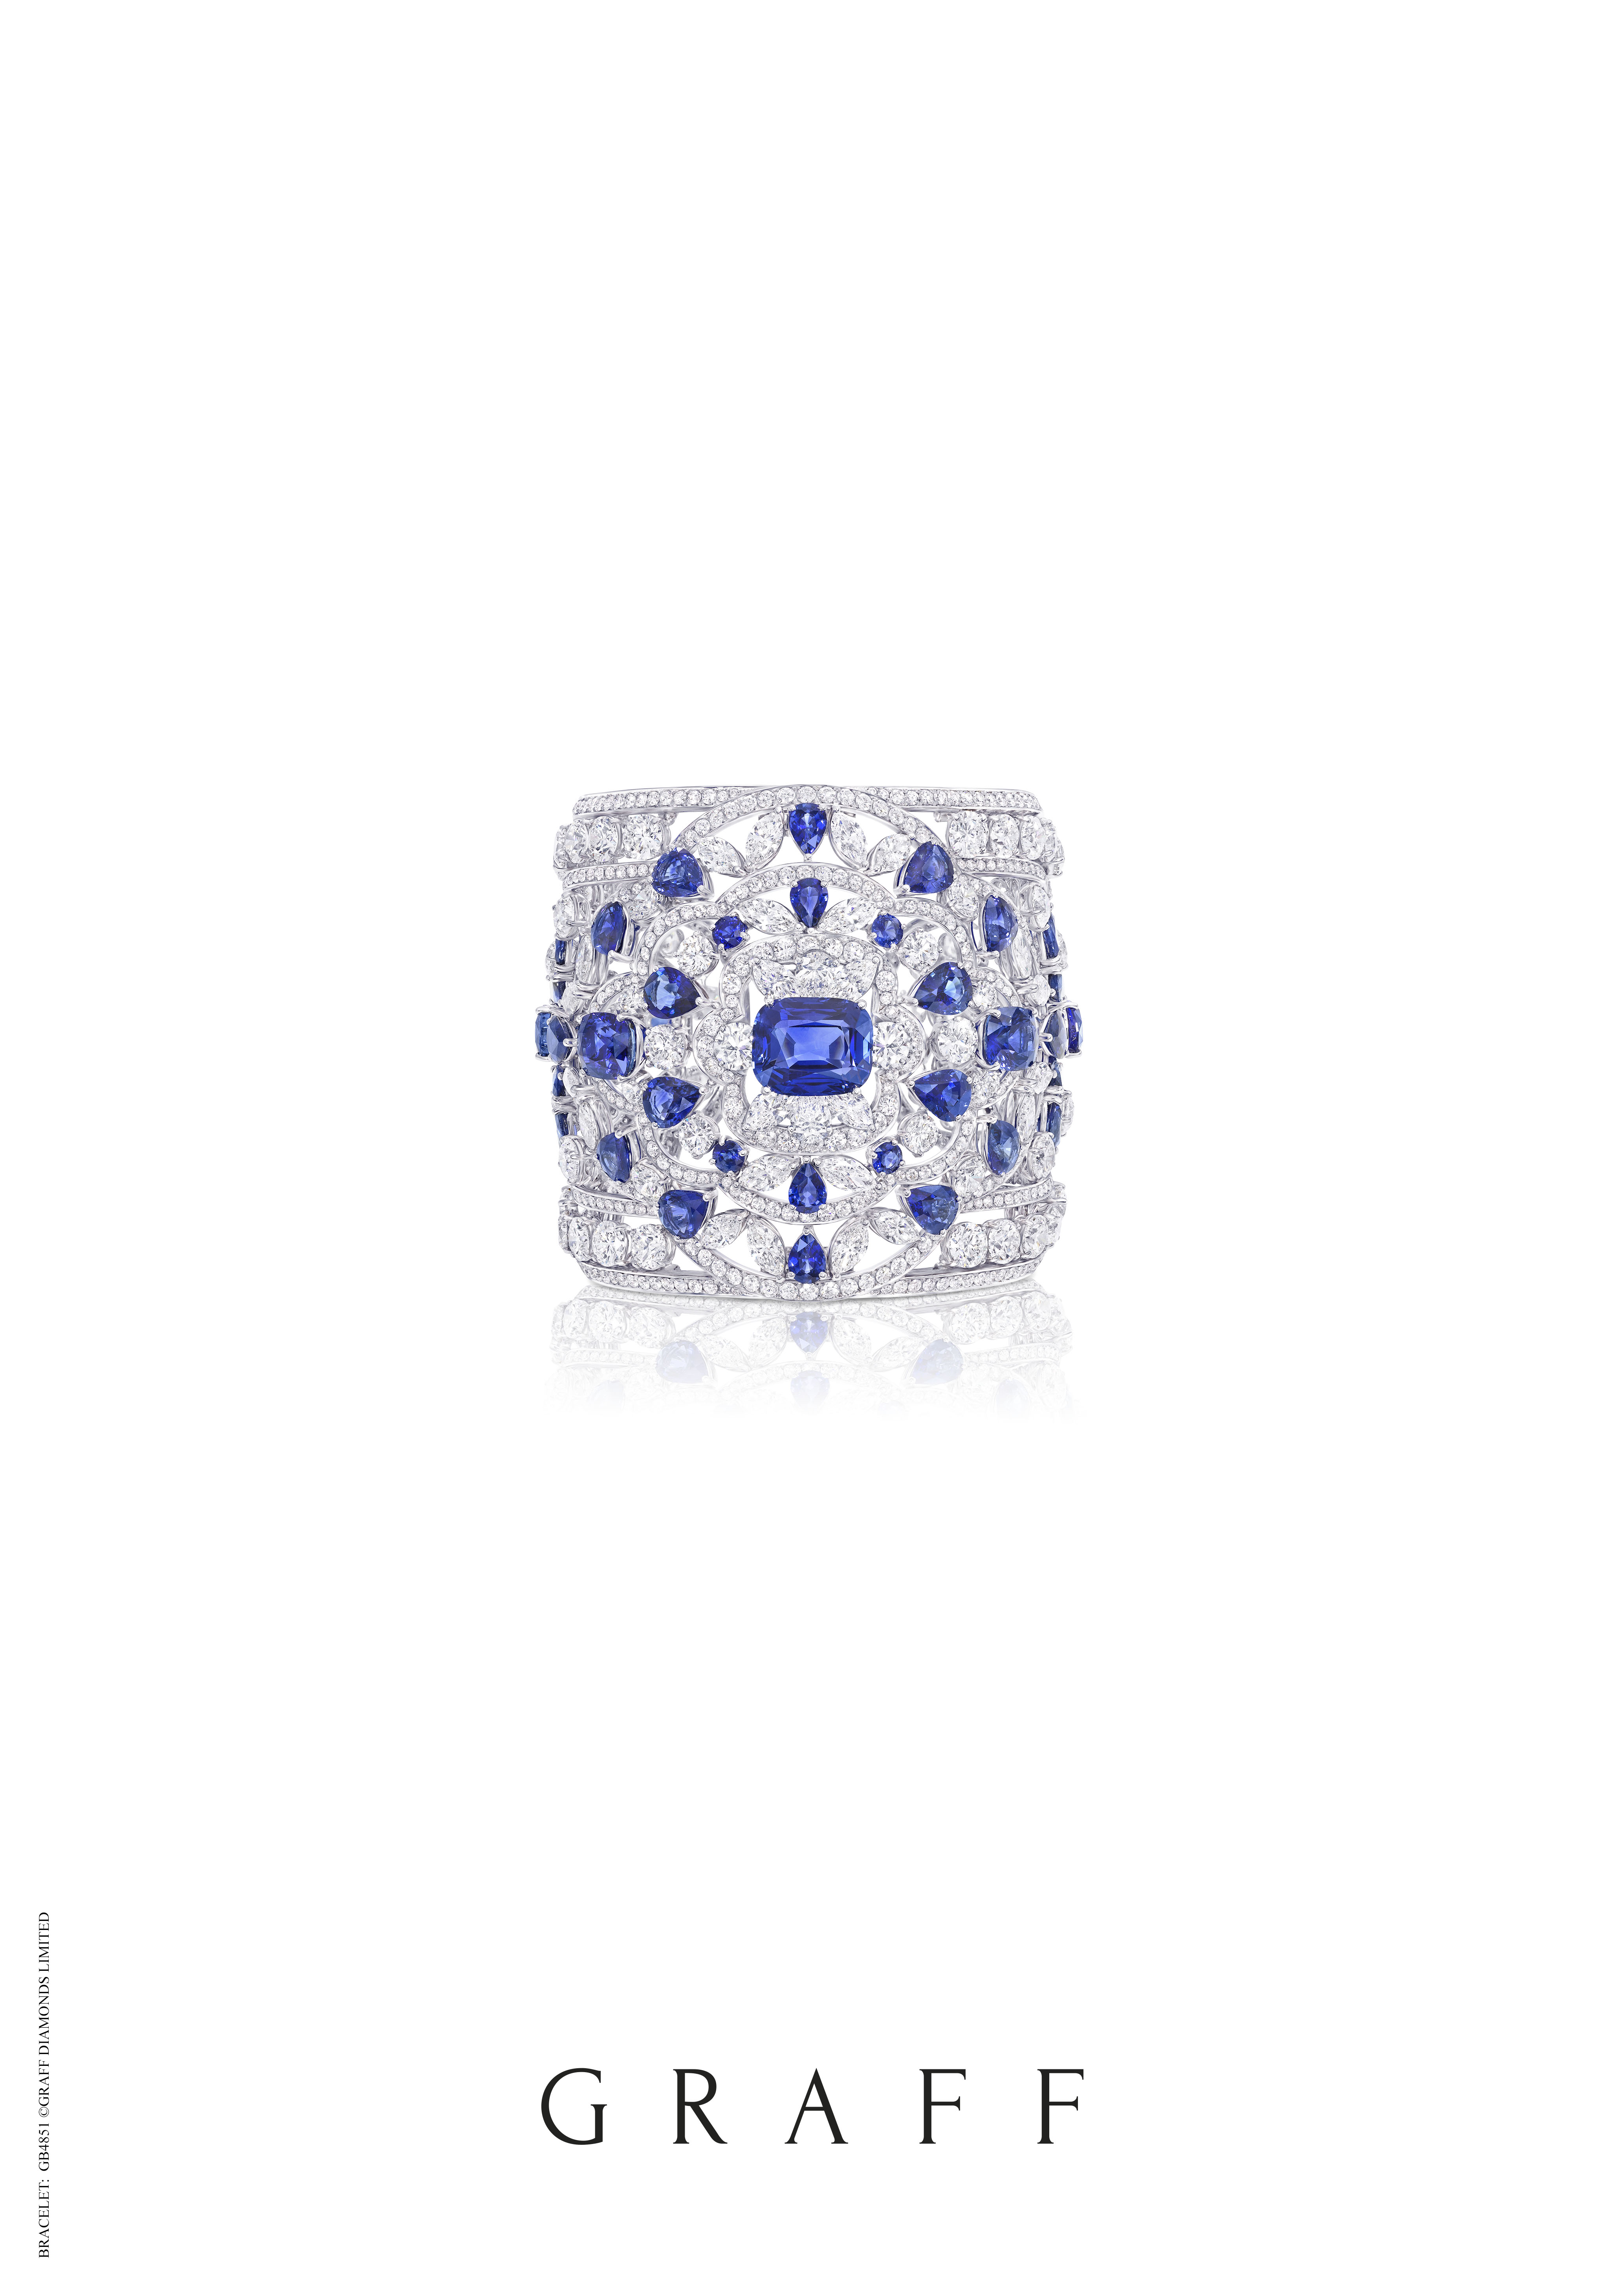 Diamond and sapphire earrings by Graff. The Graff Diamond display will include a stunning array of diamonds and sapphires. Image courtesy Graff.